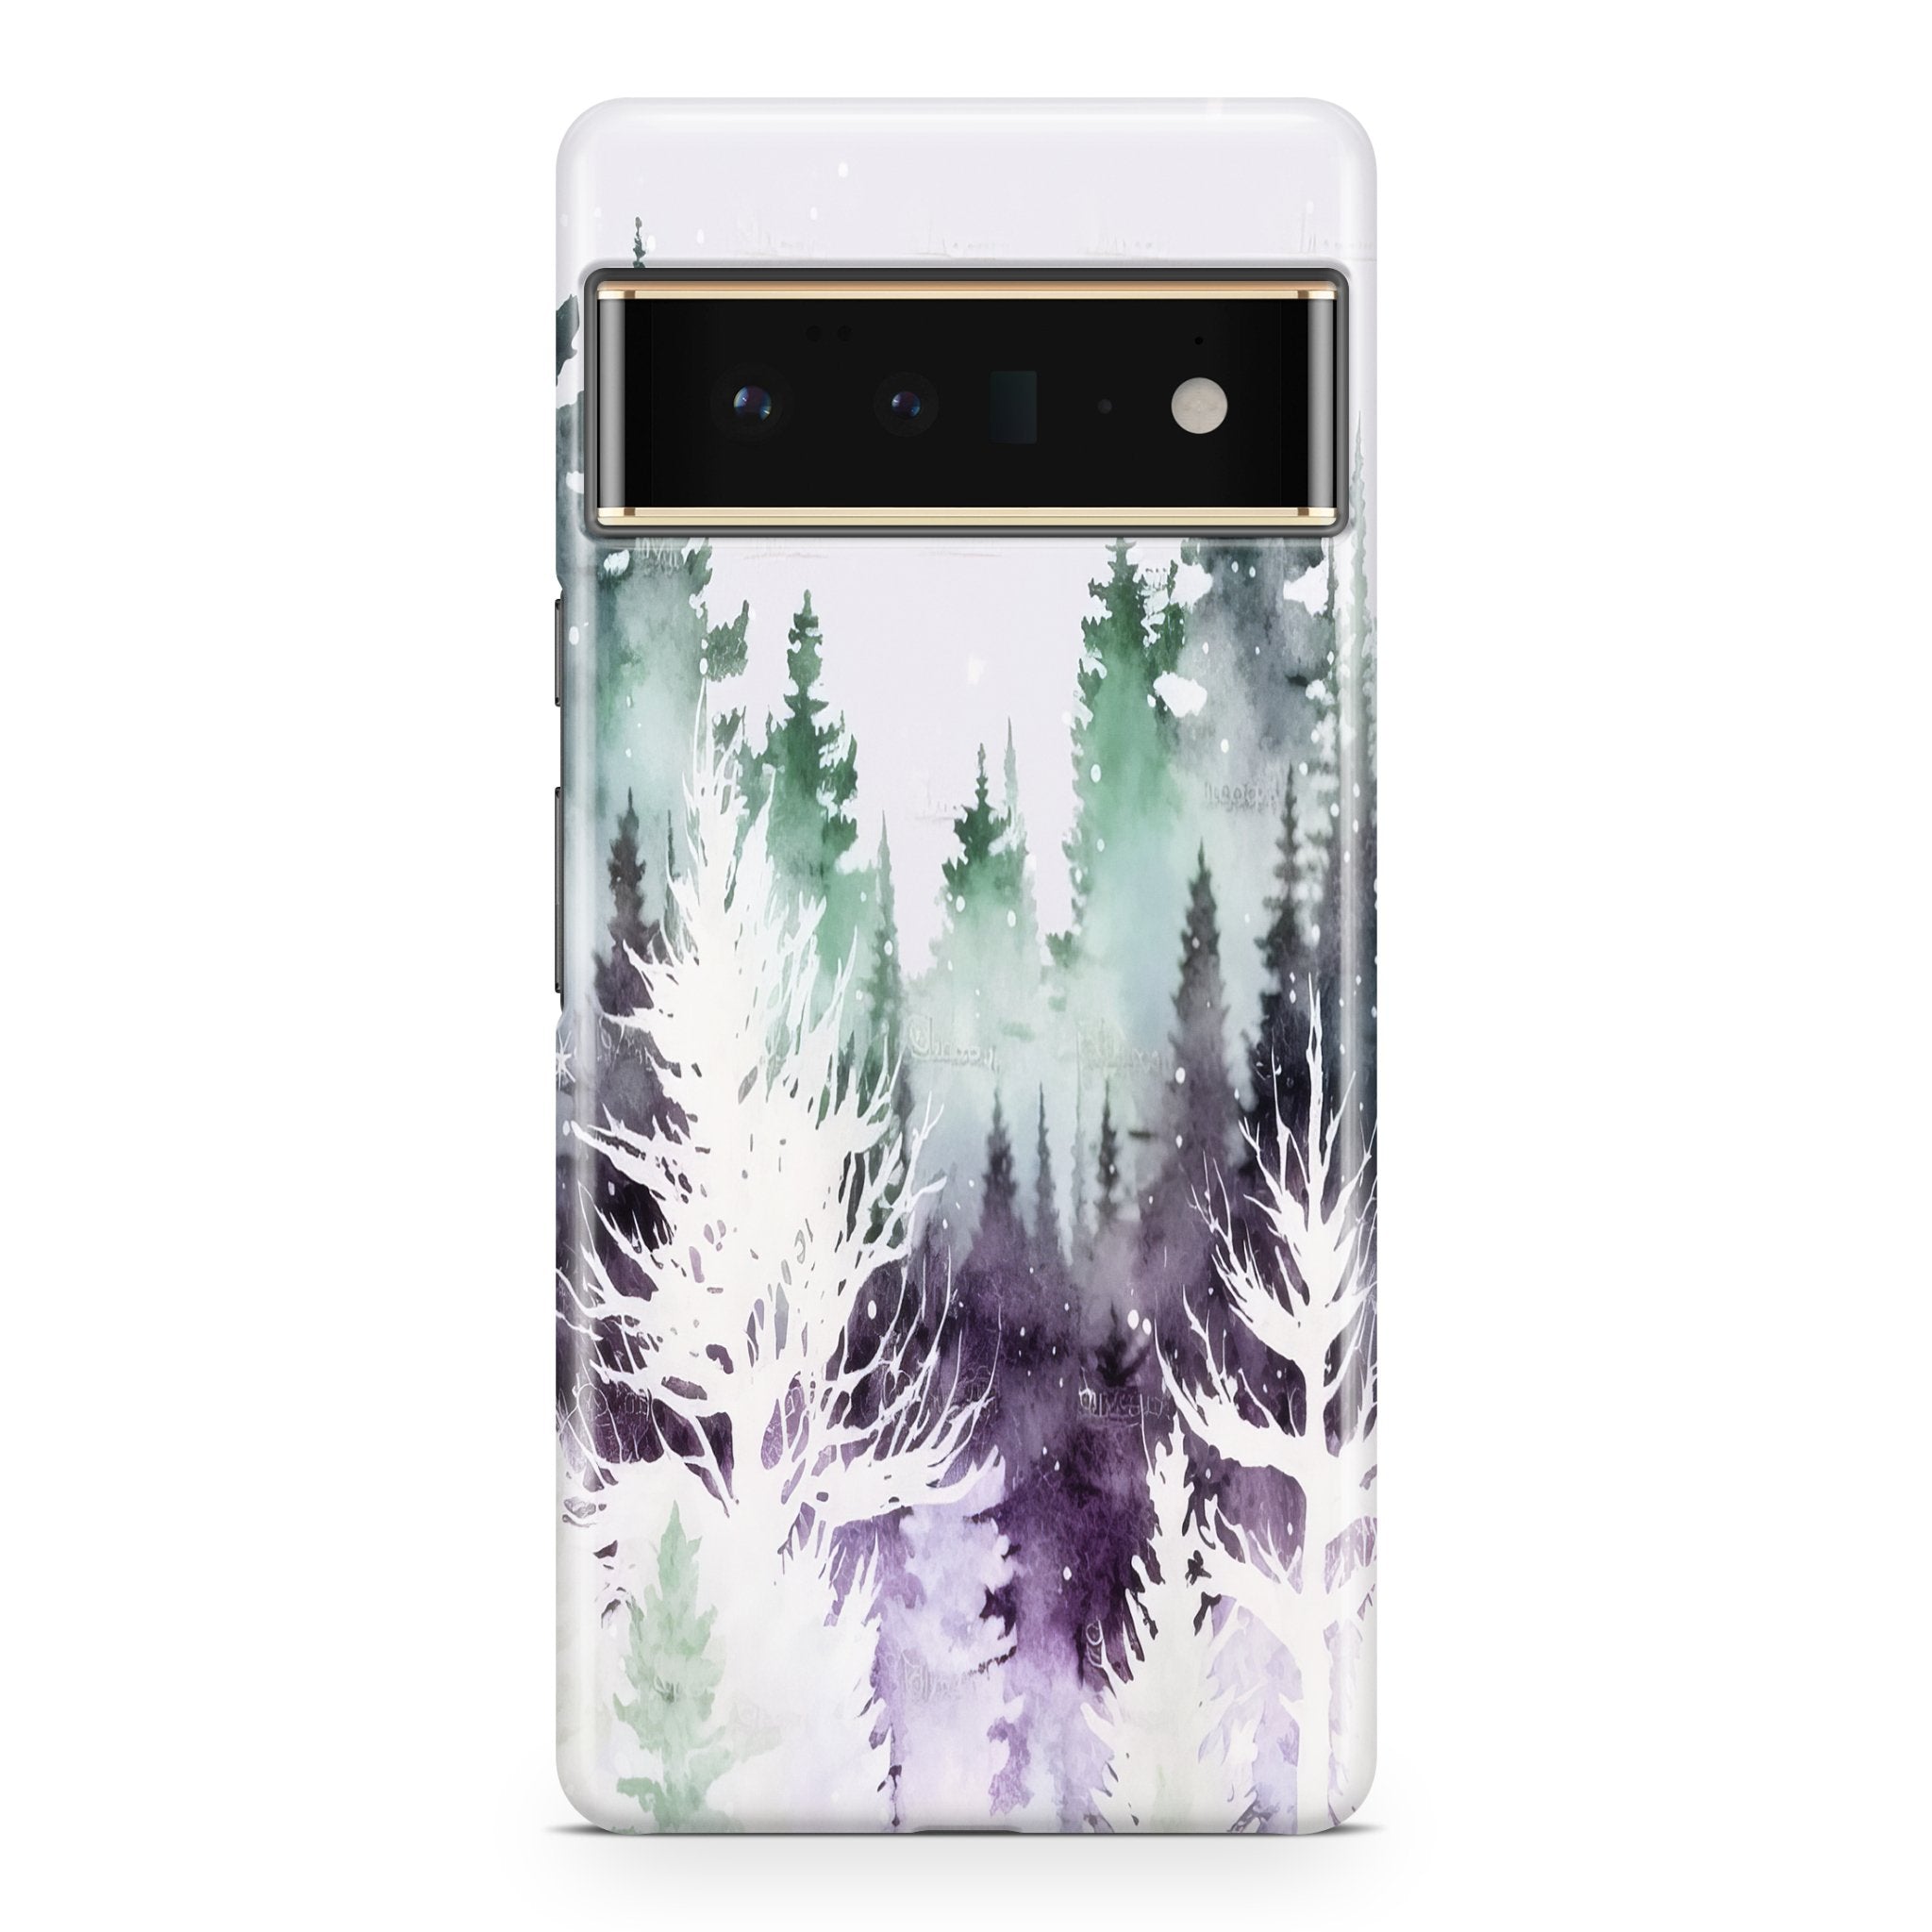 Winter Pines - Google phone case designs by CaseSwagger